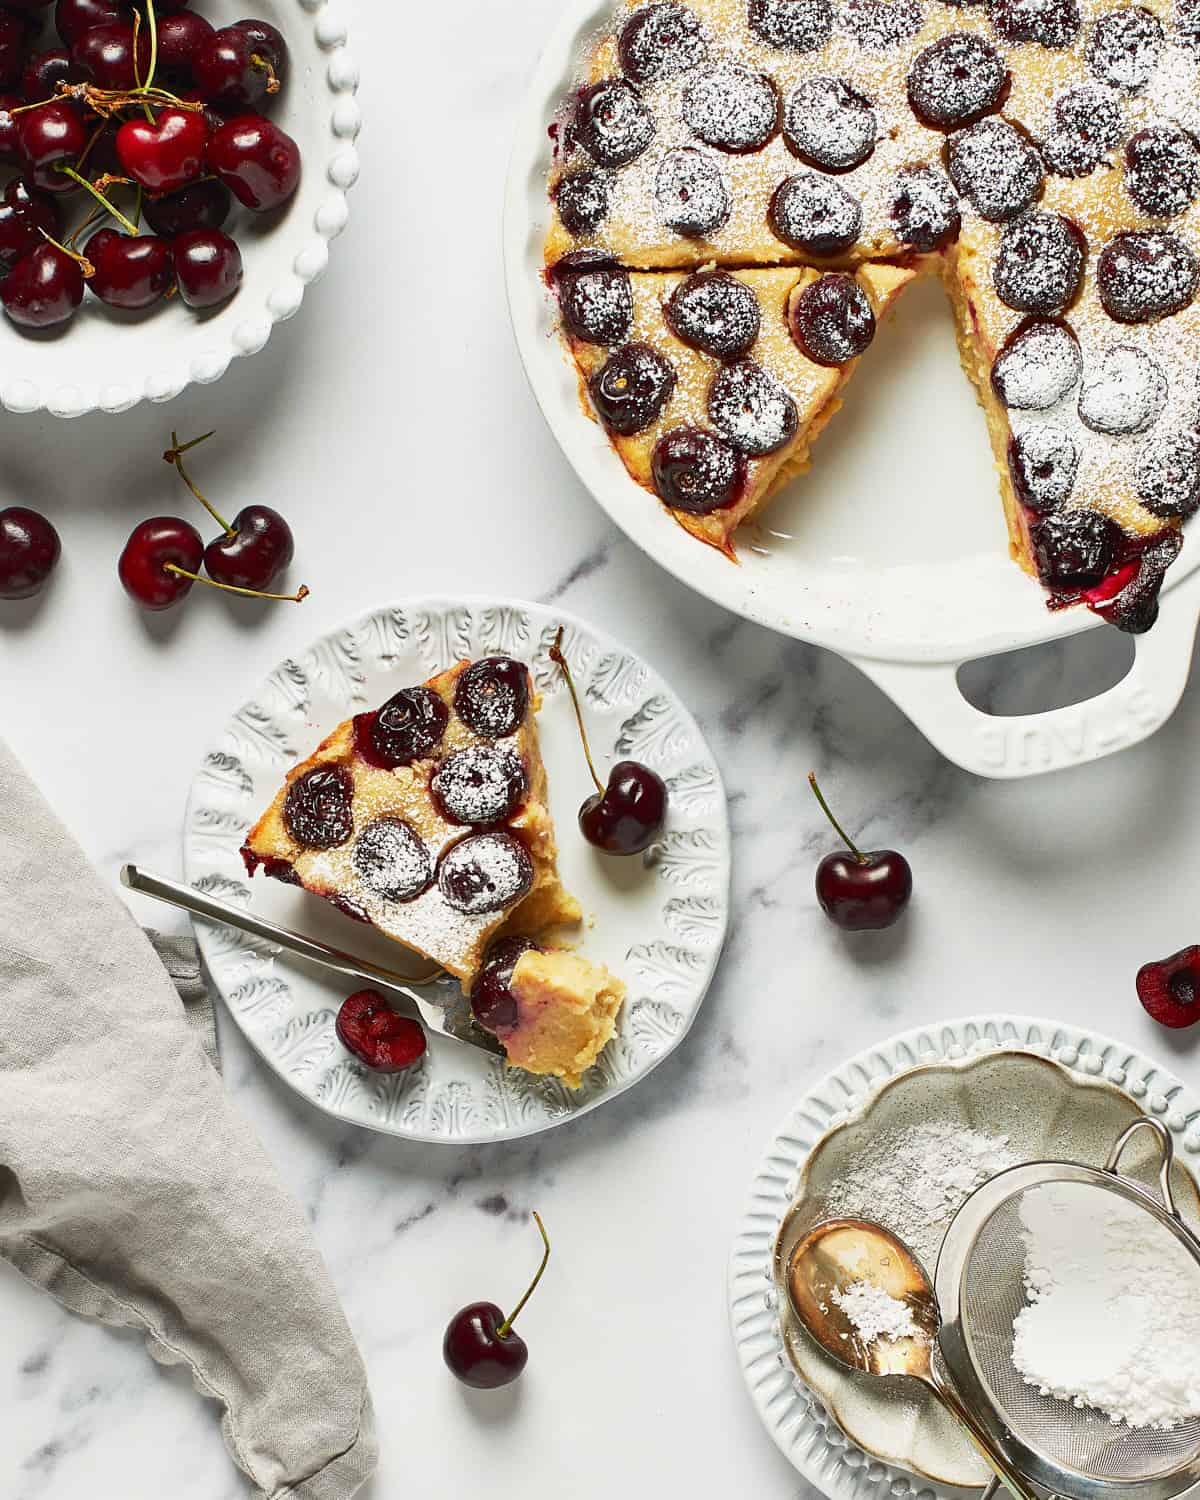 Overhead view of vegan clafoutis slice on a plate with the rest in a pie plate with cherries on the side.